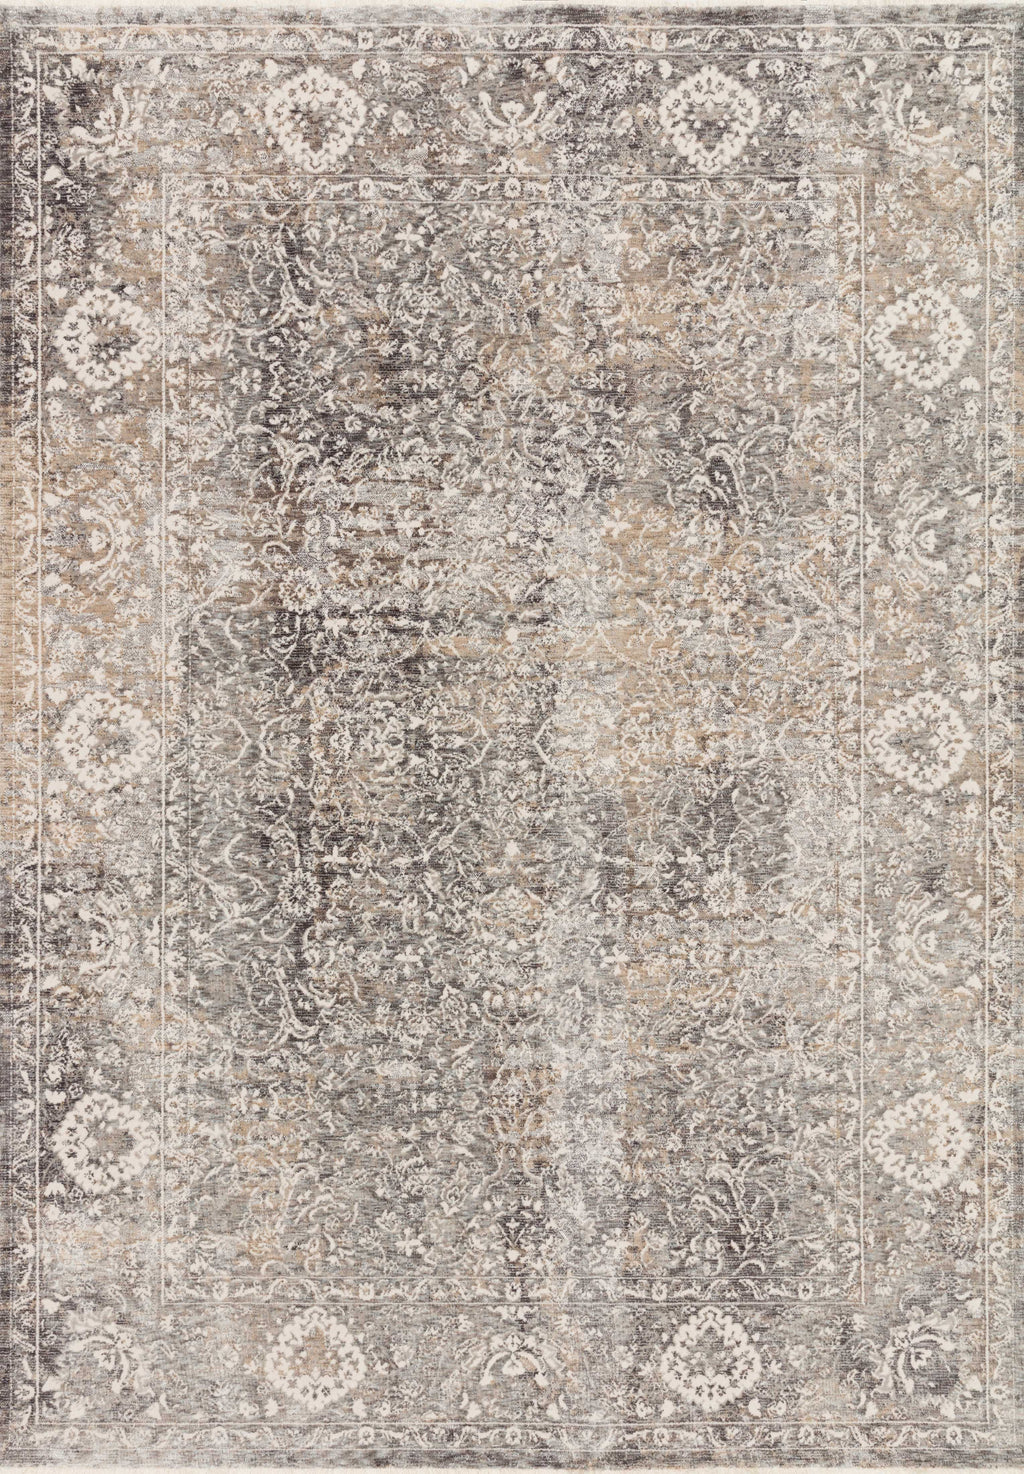 HOMAGE Collection Rug  in  STONE / IVORY Gray Accent Power-Loomed Jute/Wool